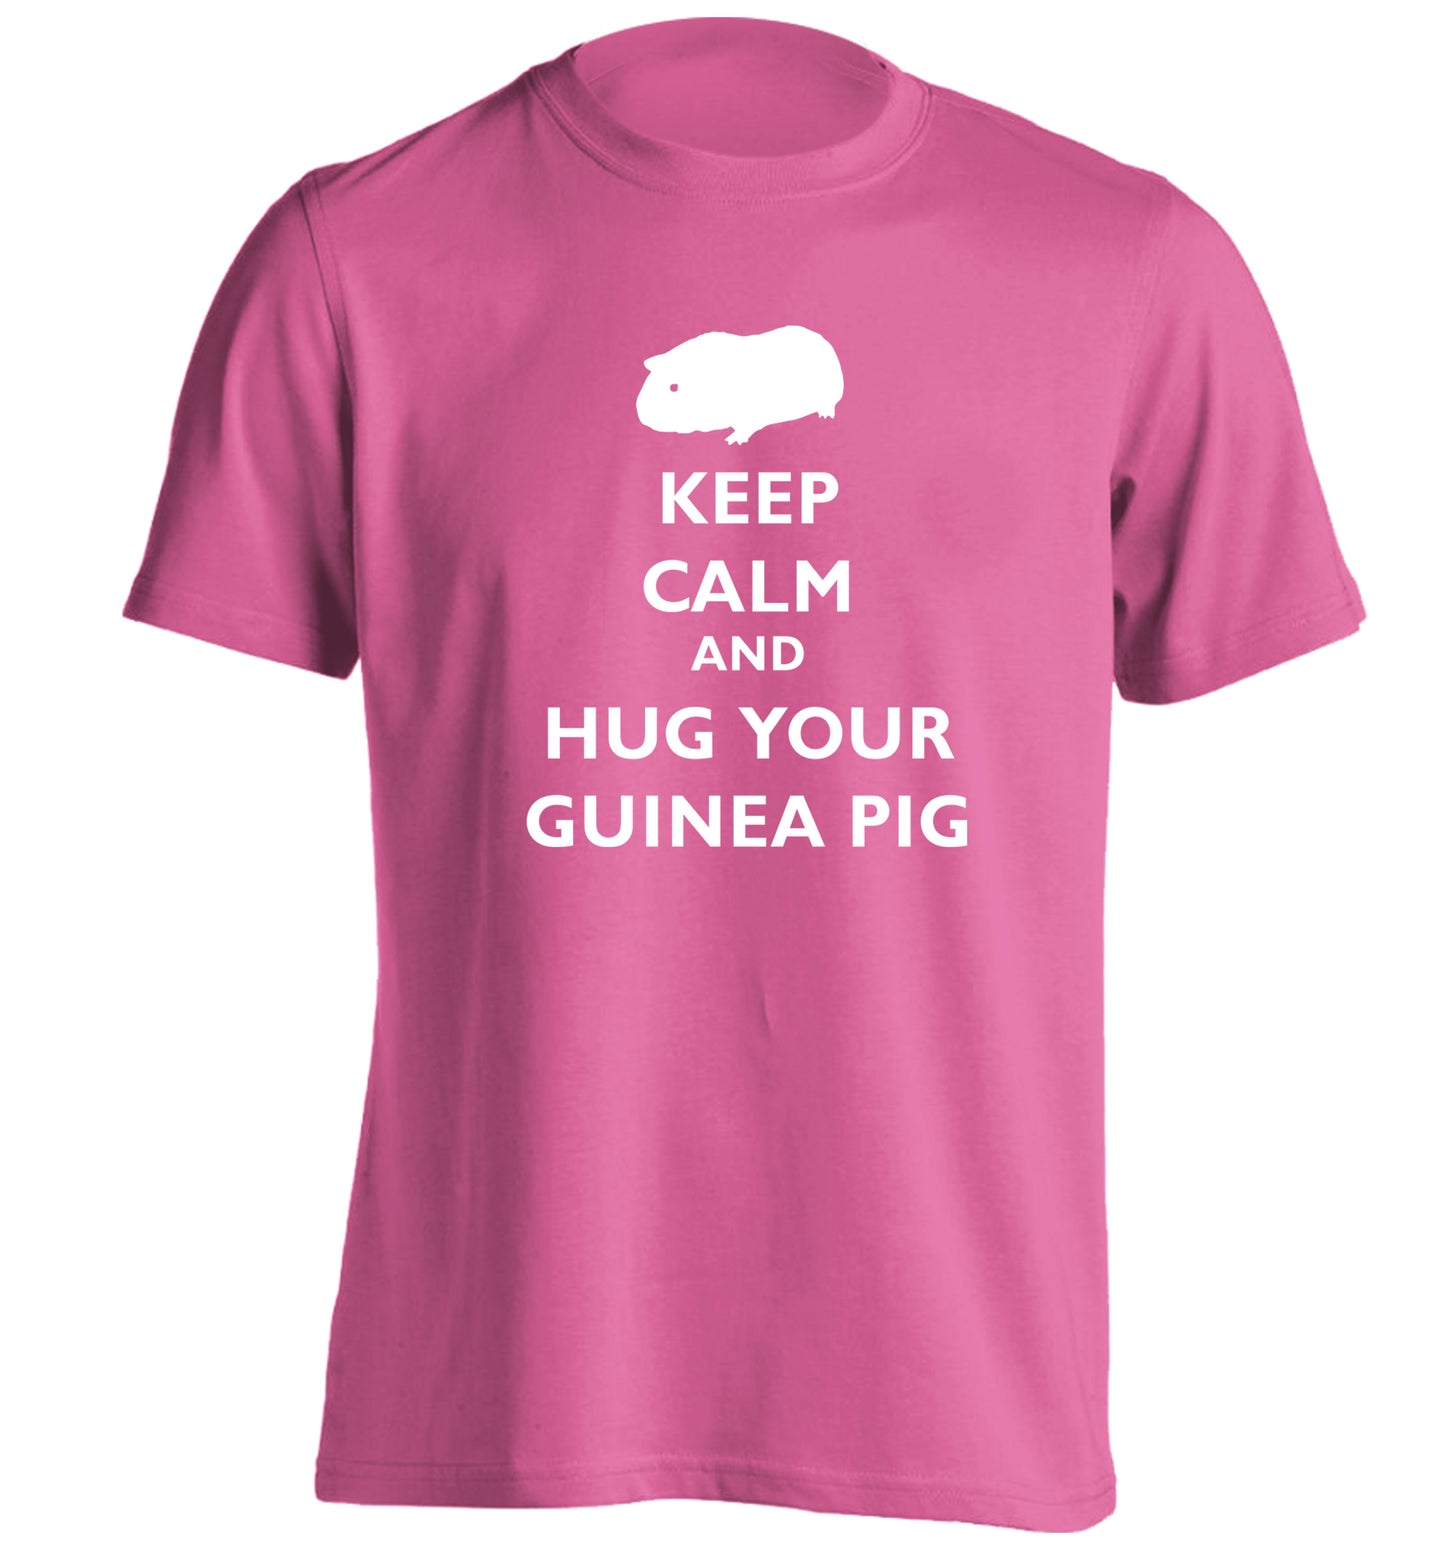 Keep calm and hug your guineapig adults unisex pink Tshirt 2XL